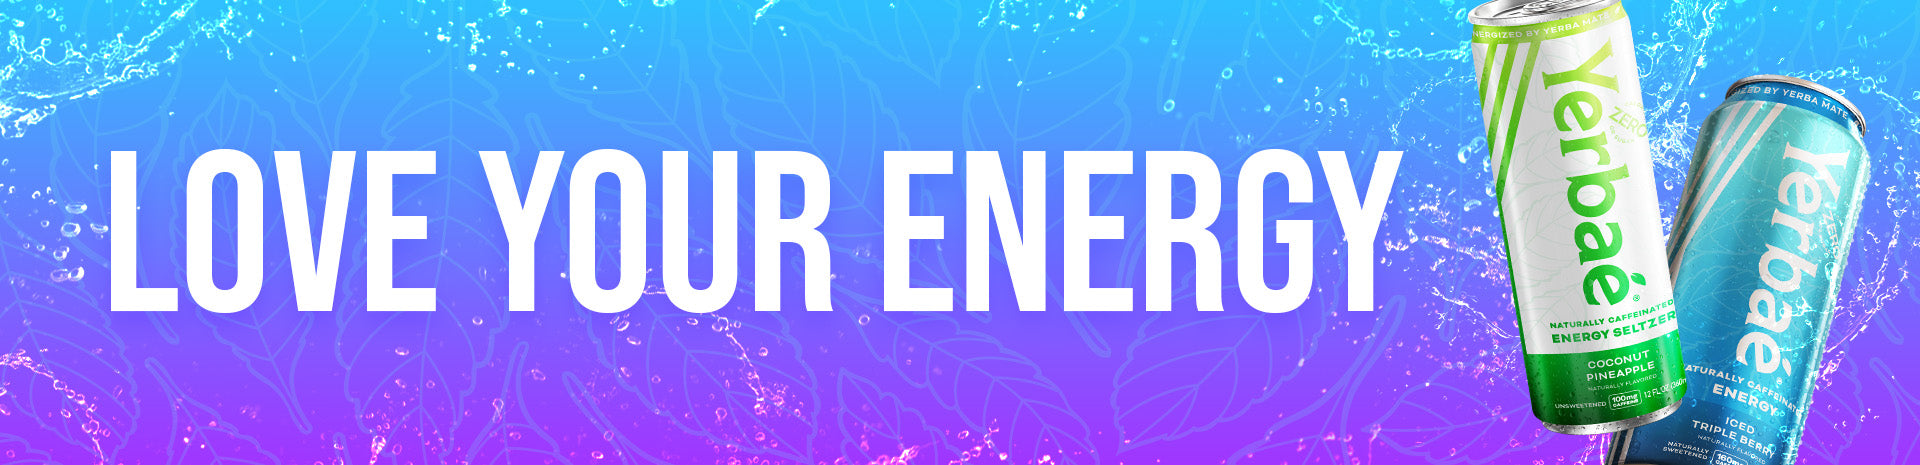 LOVE YOUR ENERGY